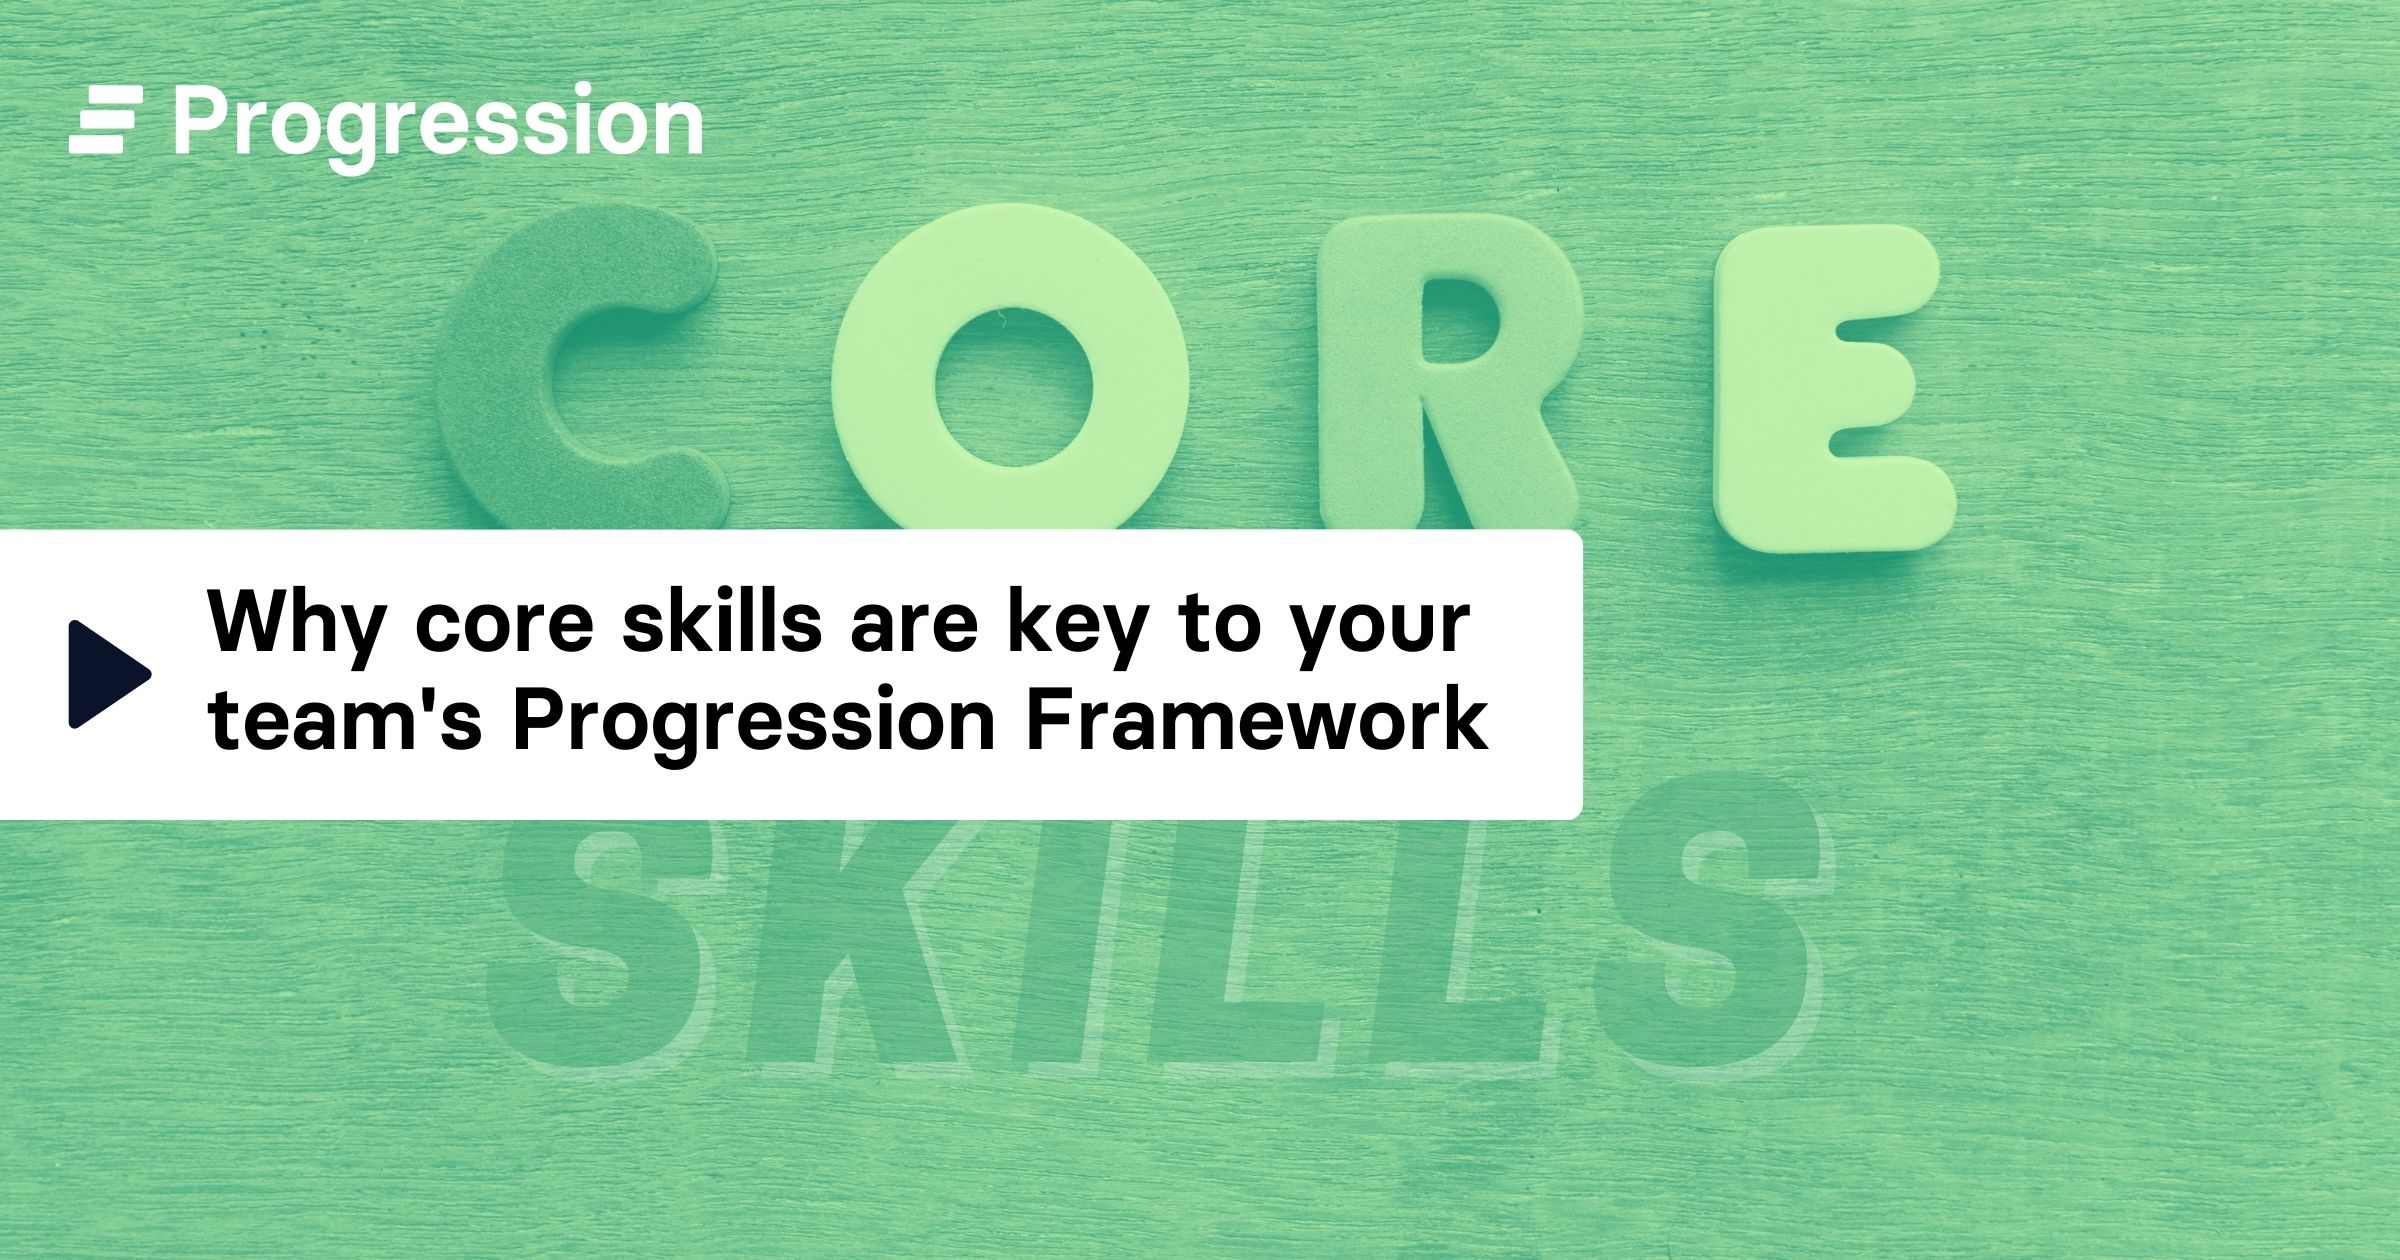 Why core skills are key to your team's progression framework